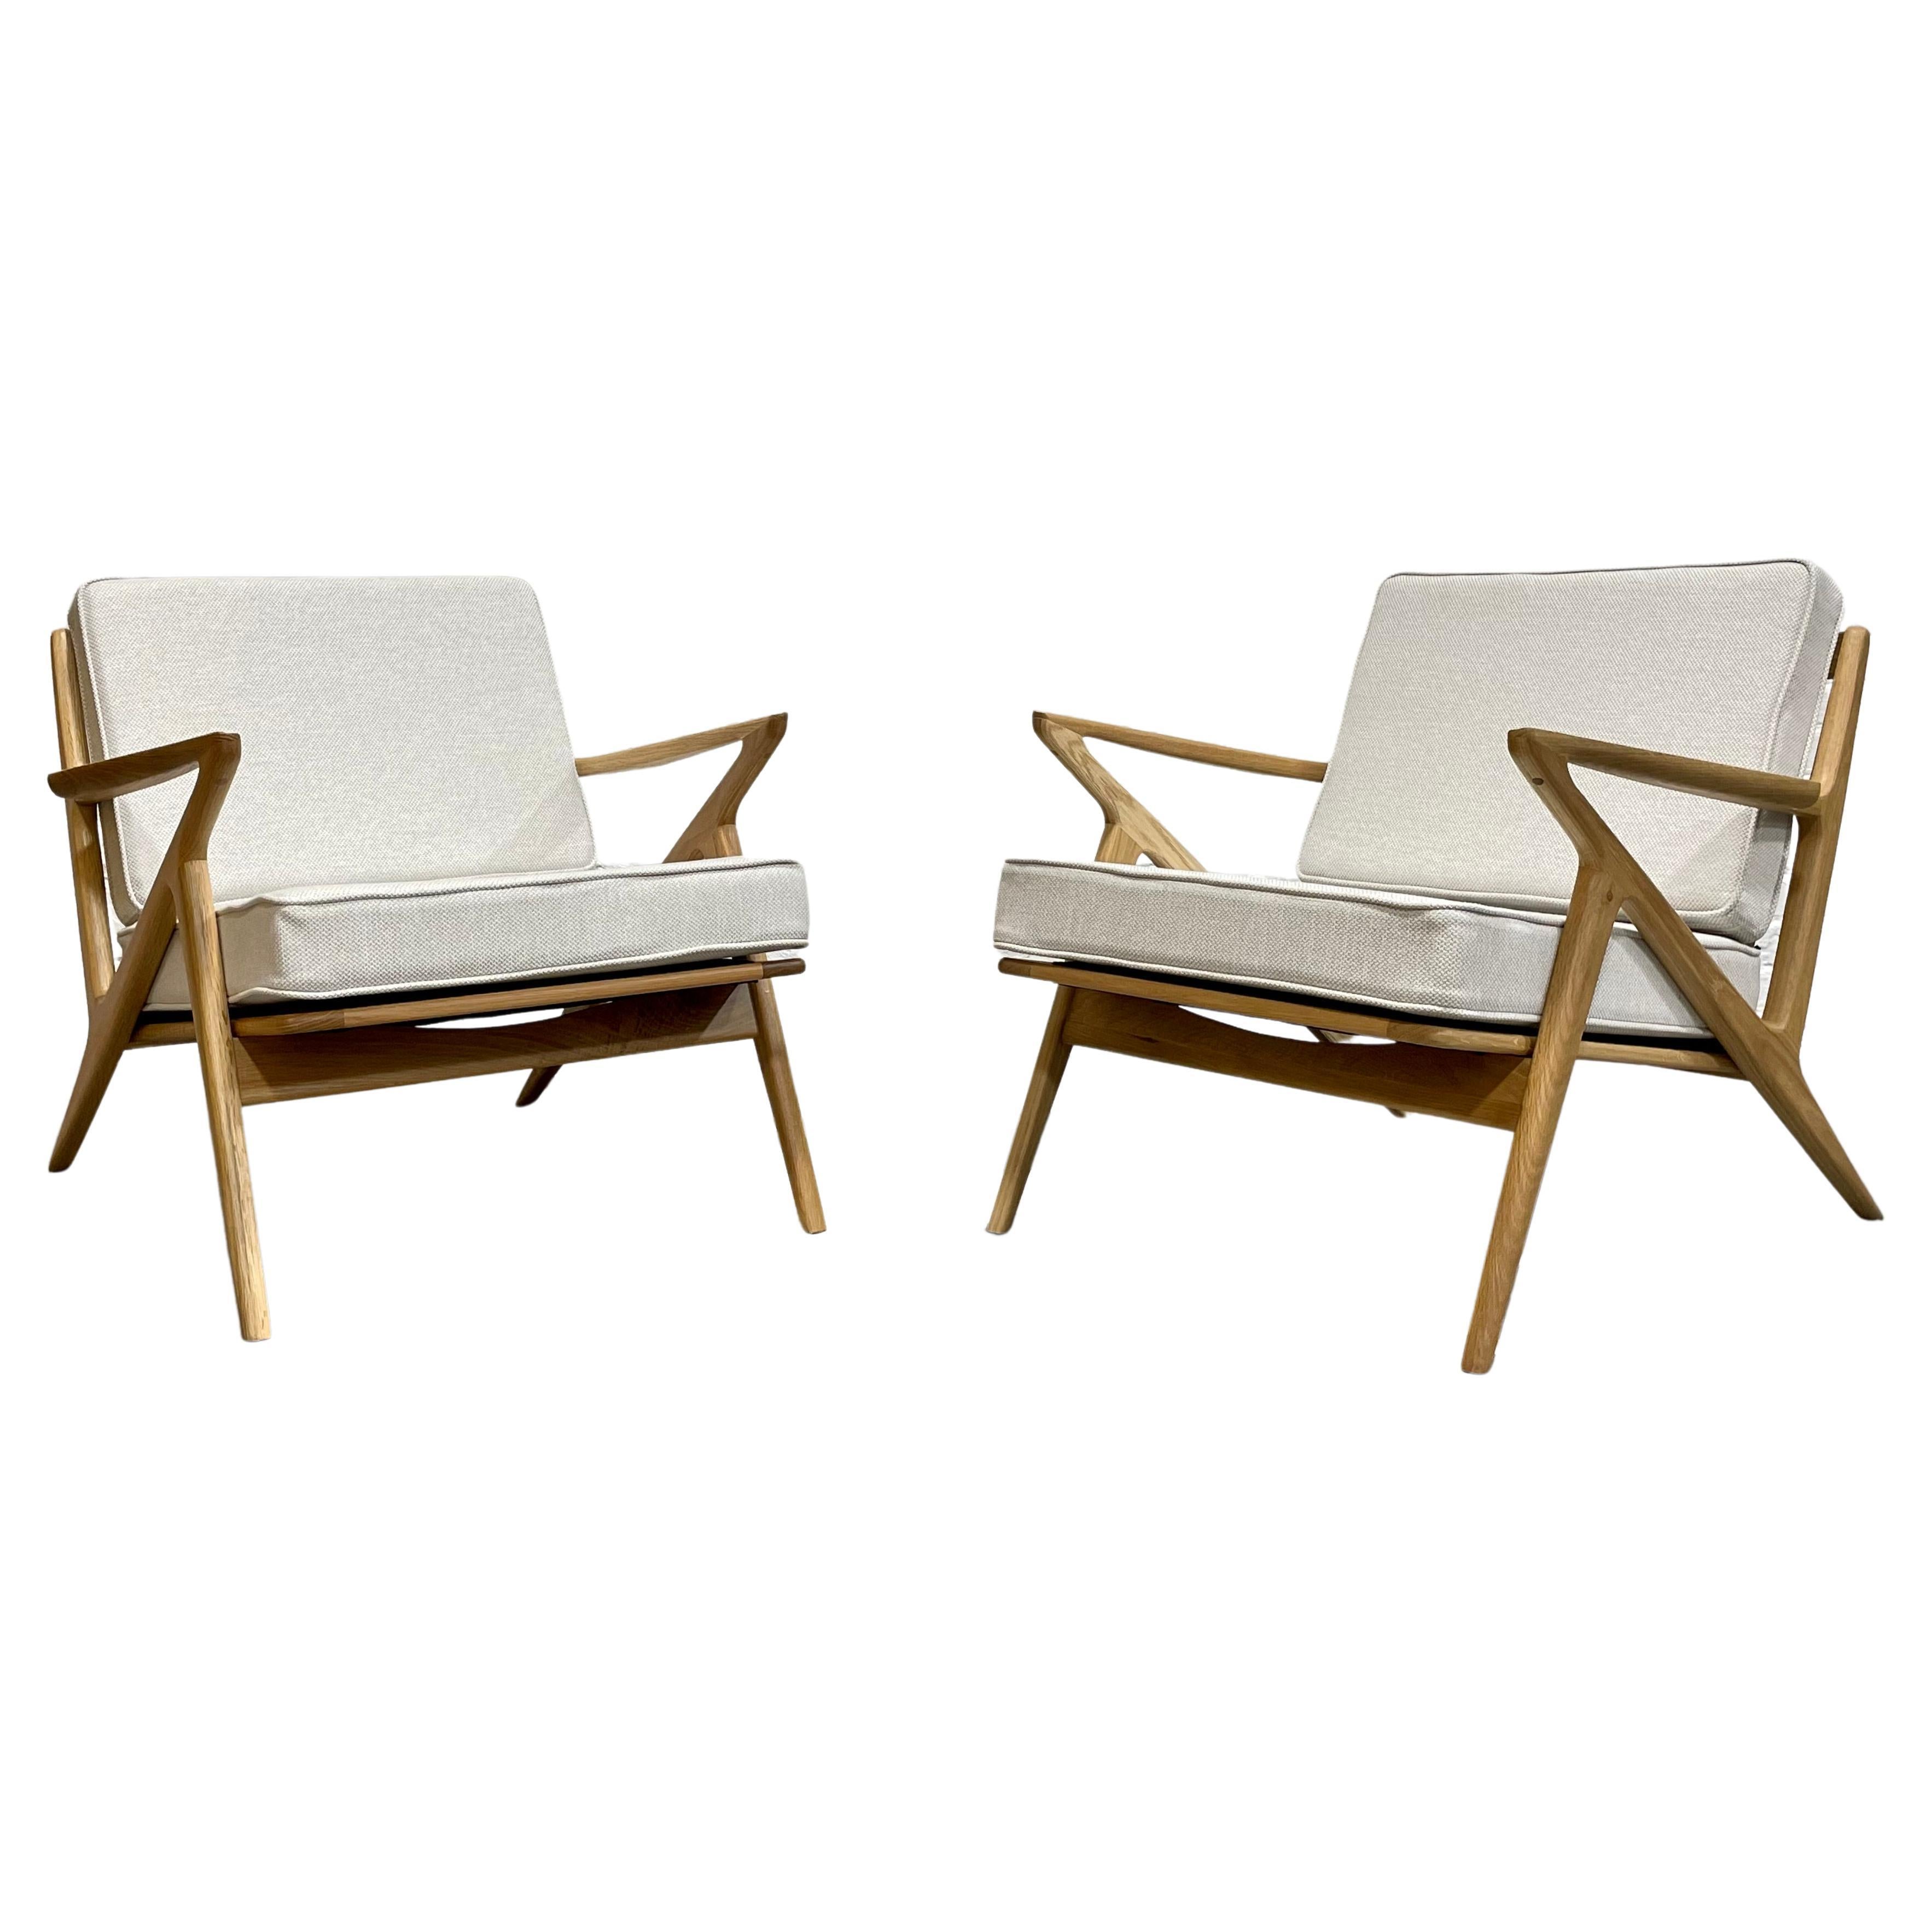 Mid-Century Modern Styled Handcrafted Oak Lounge Chairs, a Pair For Sale